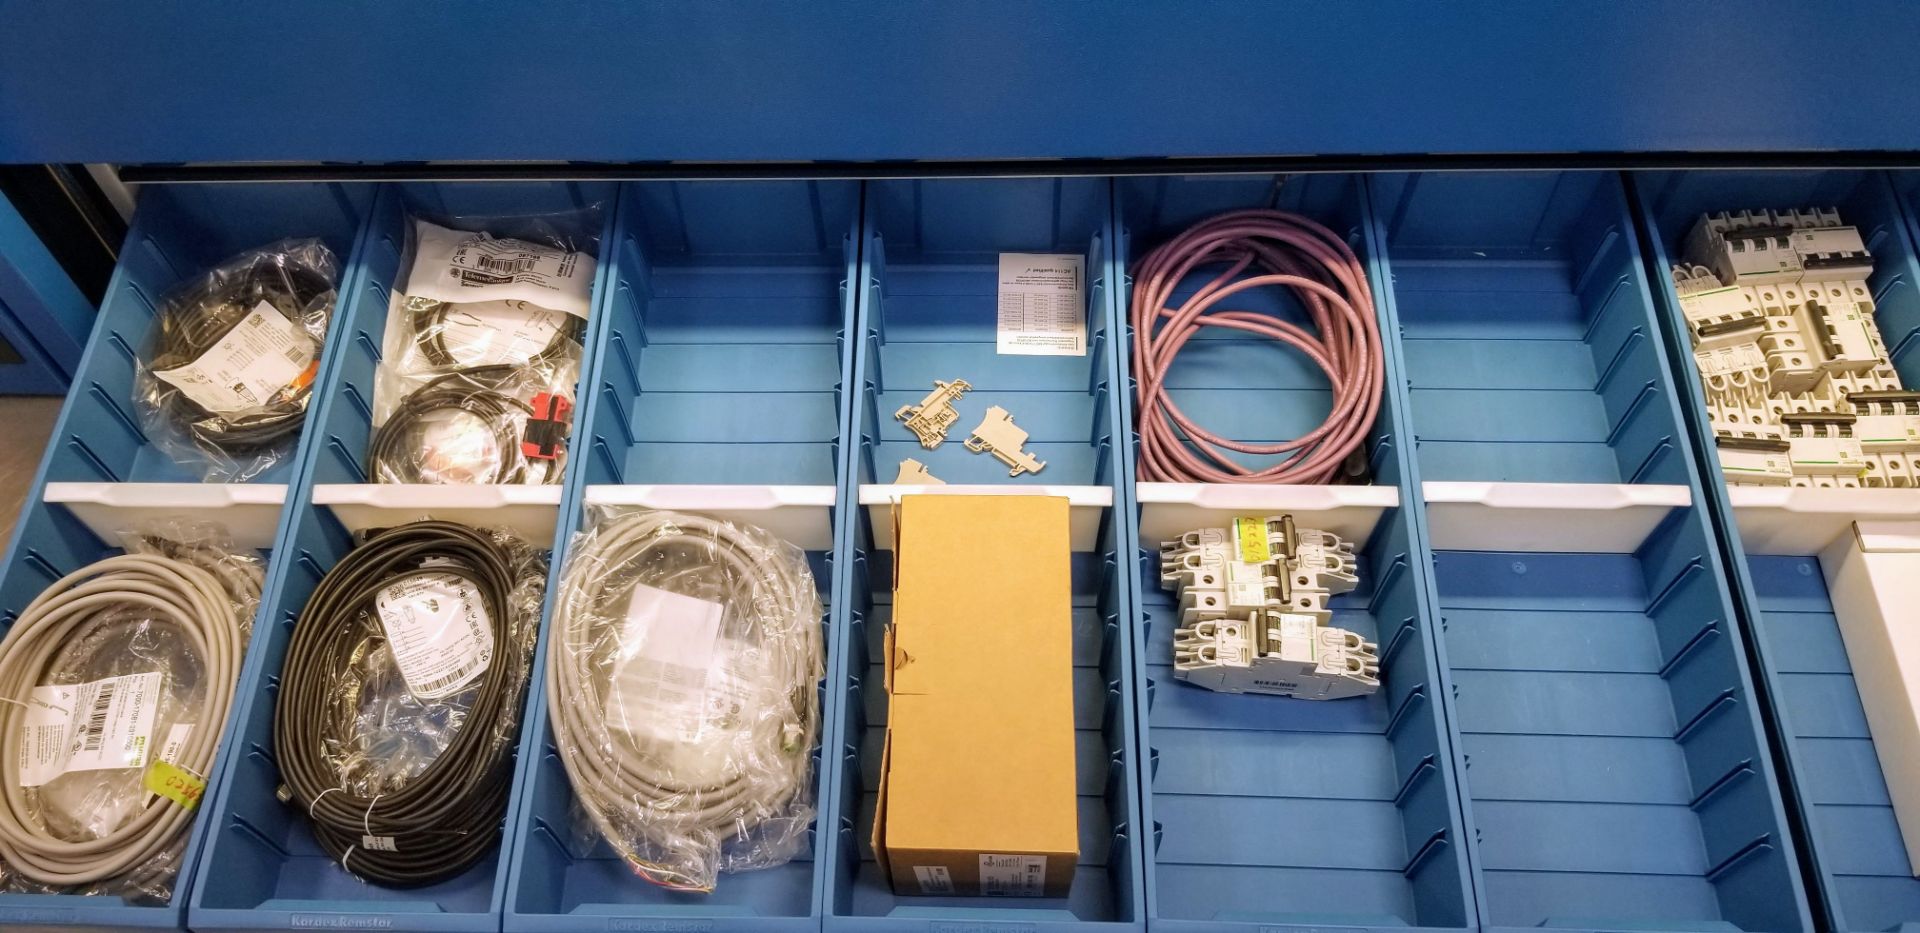 LOT - CONTENTS OF 36 SHELVES INCLUDING: MOTOR CABLES, HYBRID CABLES, PLUGS, INPUT CARDS, MODULES, - Image 67 of 100